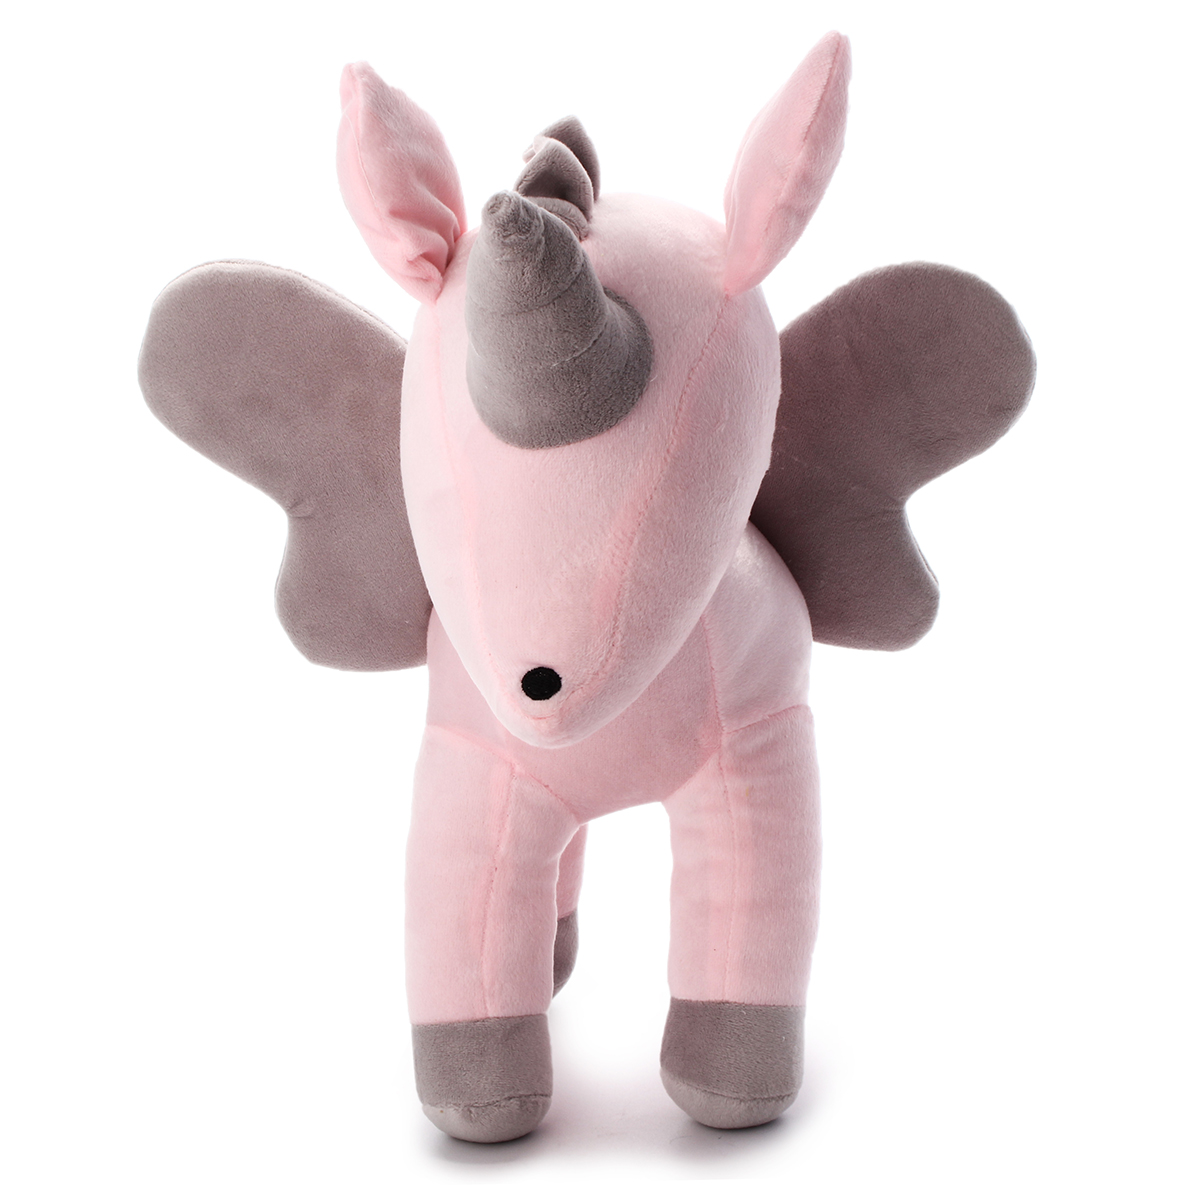 16-Inches-Soft-Giant-Unicorn-Stuffed-Plush-Toy-Animal-Doll-Children-Gifts-Photo-Props-Gift-1299365-3